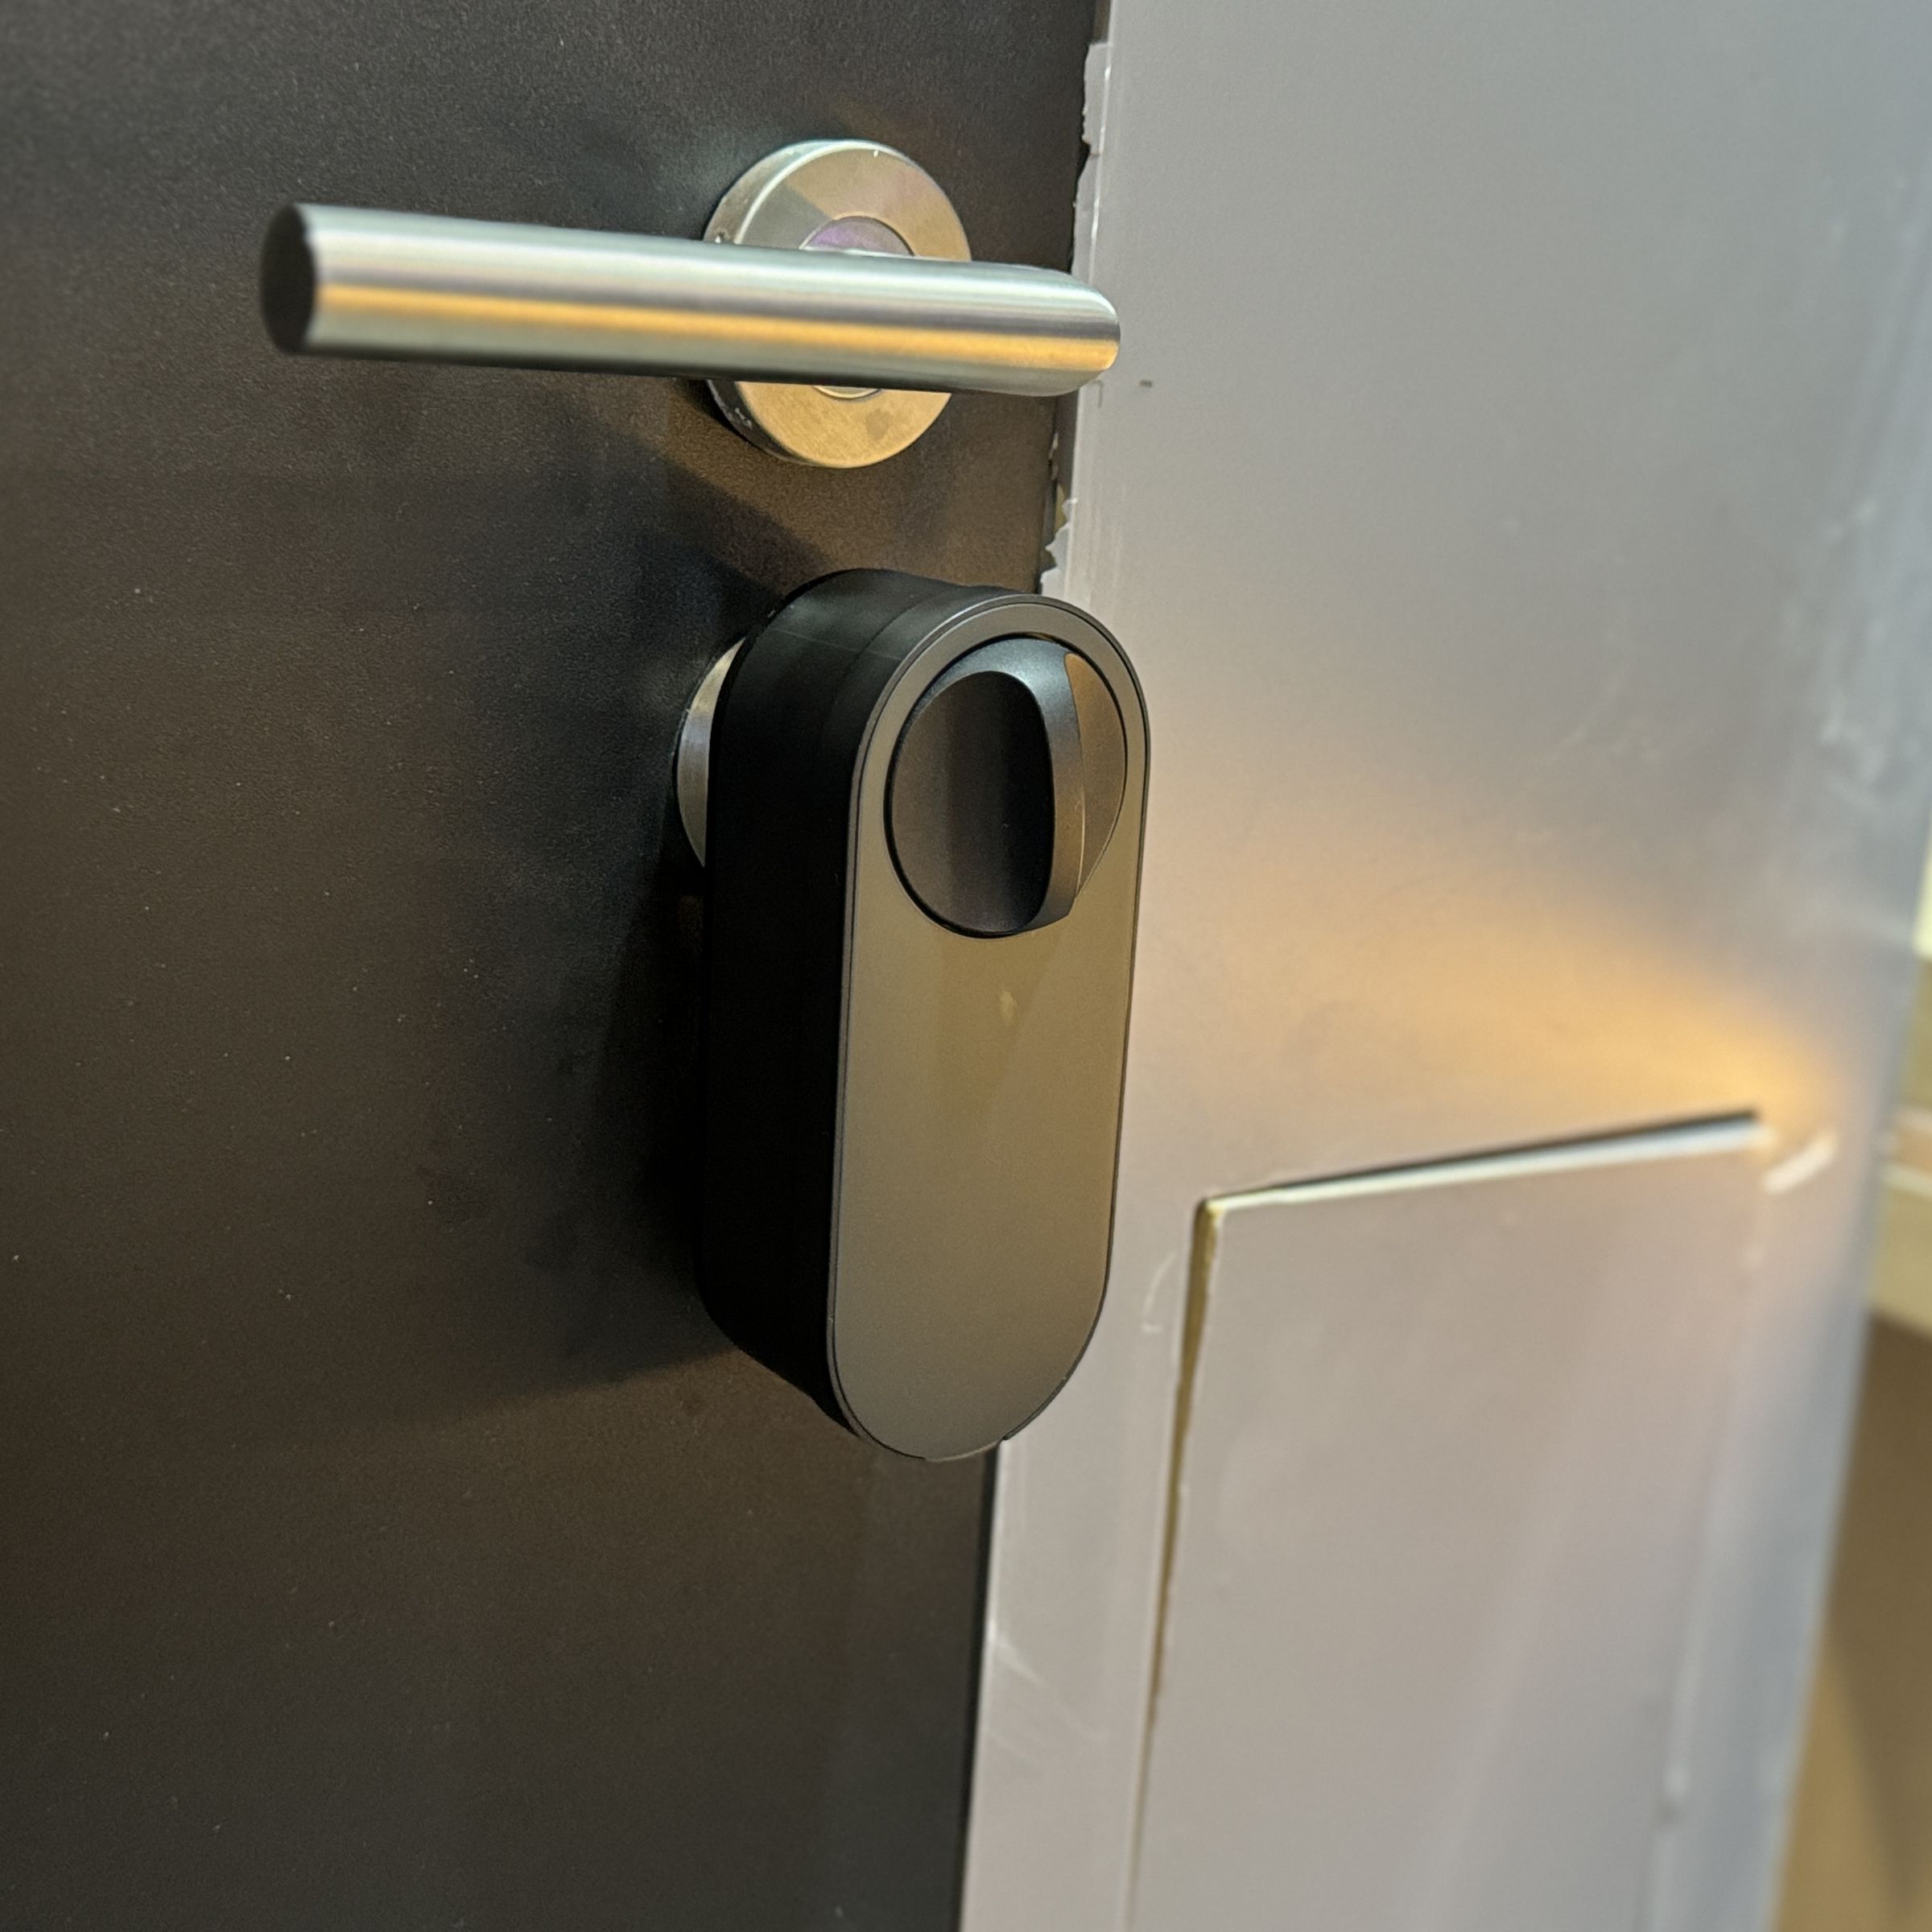 Aqara’s U200 smart lock is a retrofit, Matter-over-Thread door lock, with support for Apple Home Key promised.